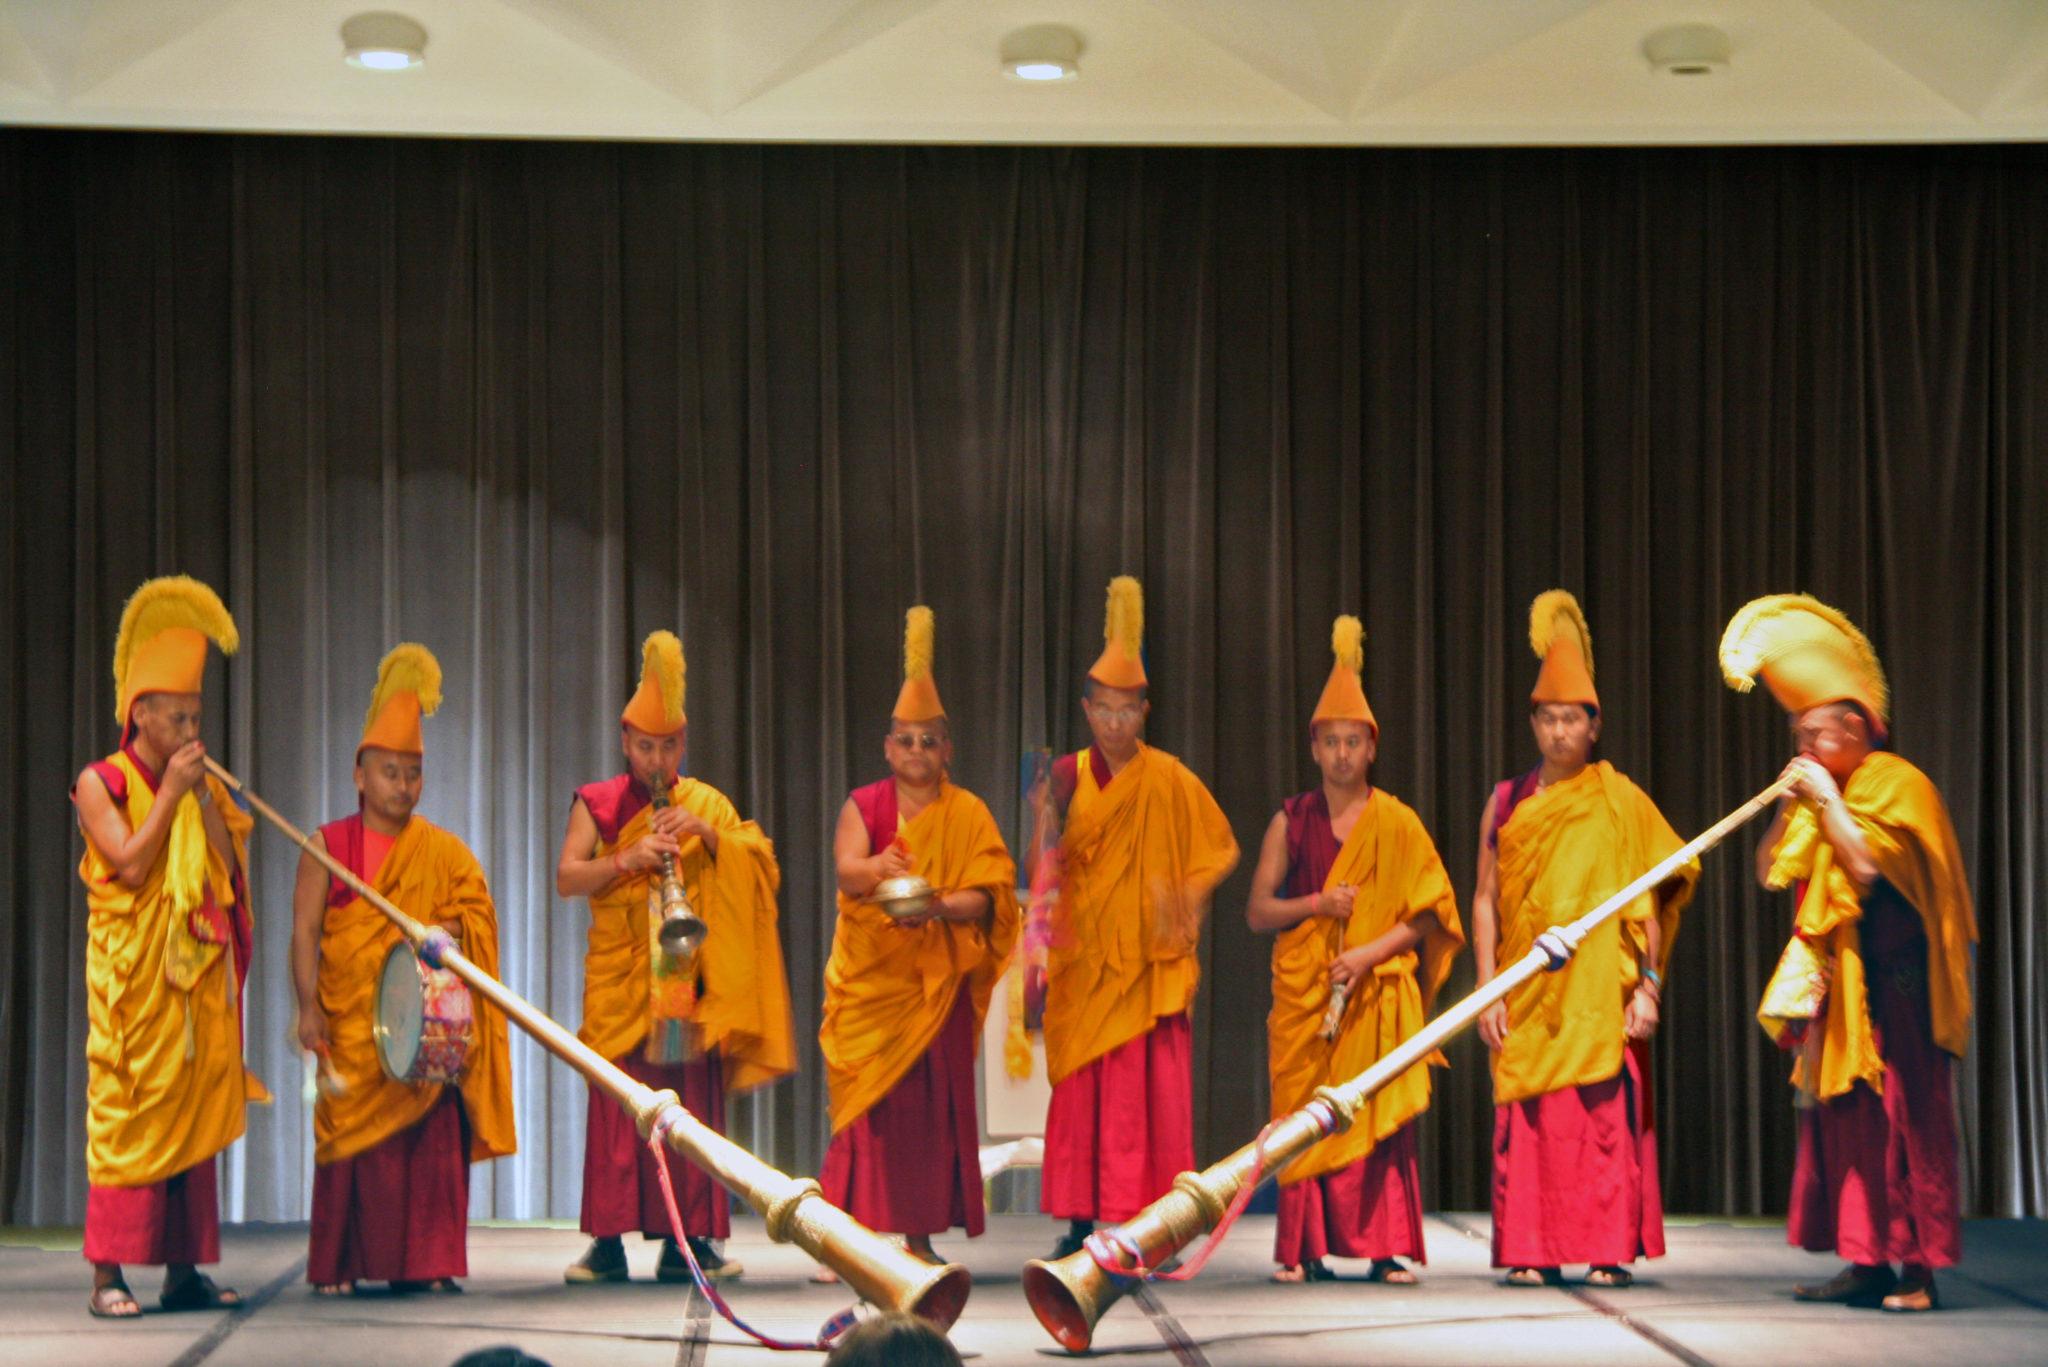 Tibetan monks play traditional long horn instruments at the Tibetan Cultural pageant last Friday at Pierson Auditorium. The horns are used for religious, cermonial and monastic purposes.